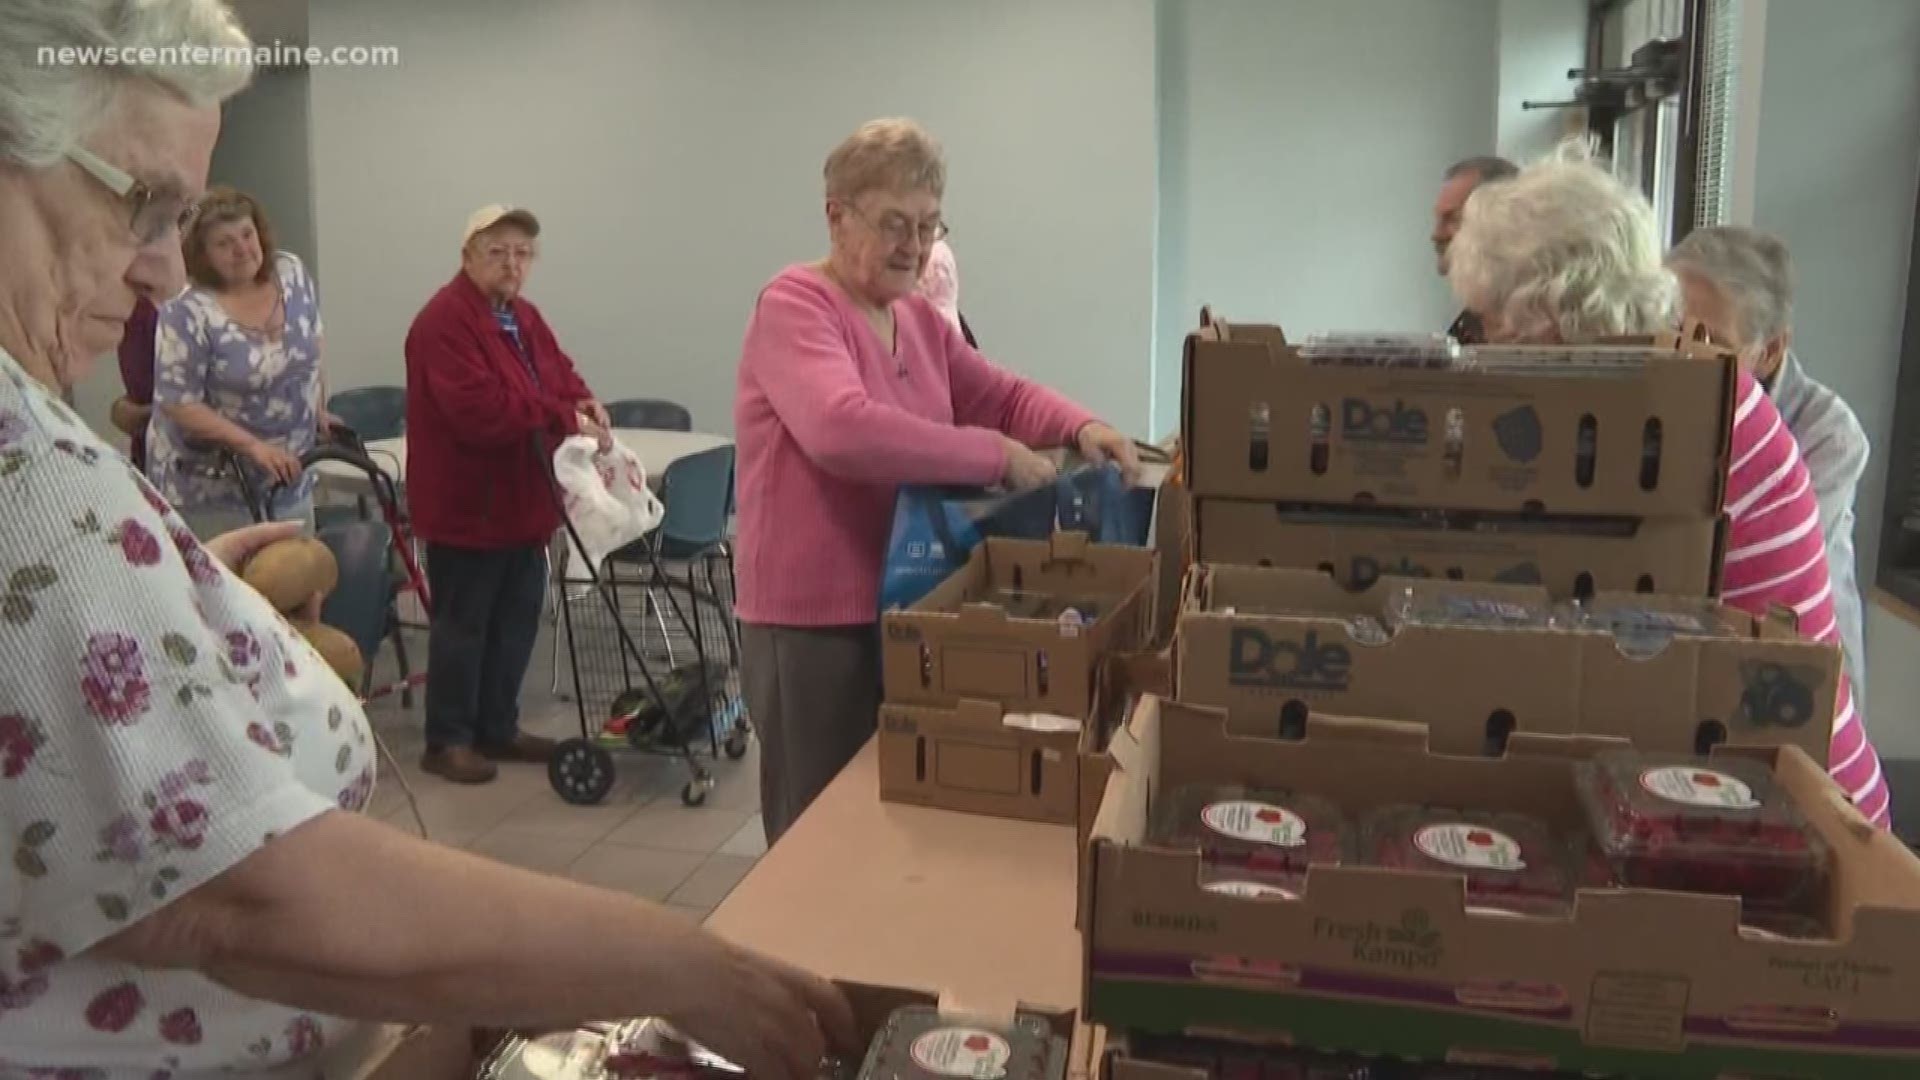 Feed Maine: the Good Shepherd Food Bank brings produce to seniors who may not otherwise be able to afford it.